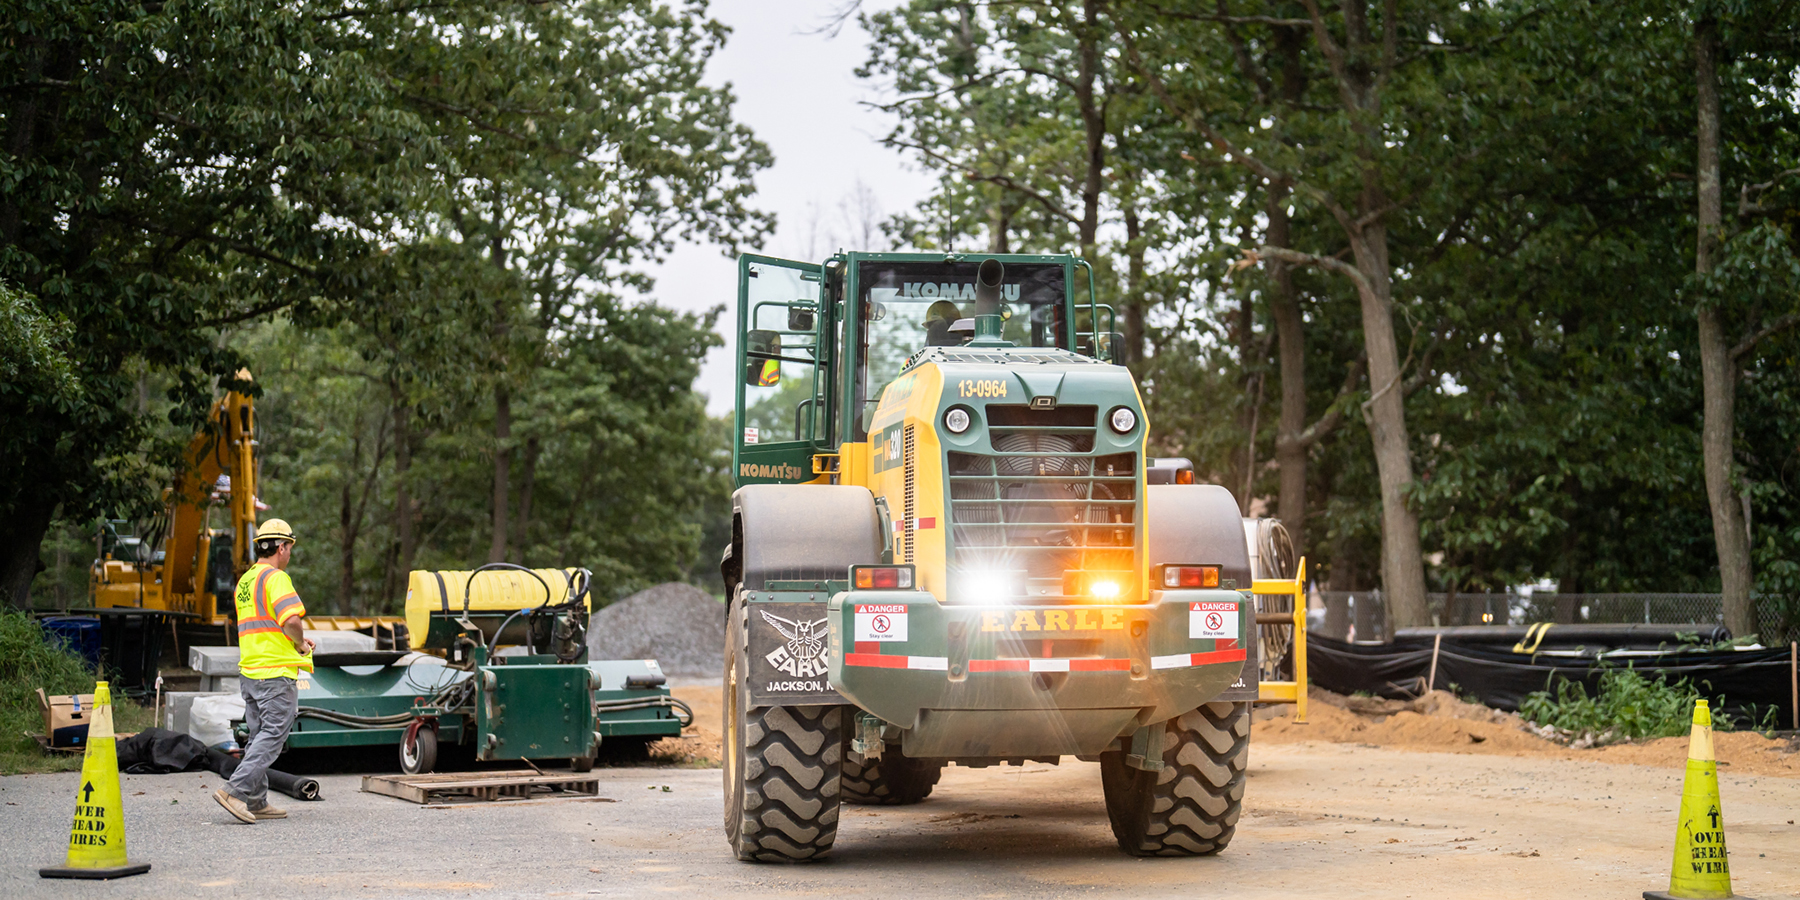 An Earle tractor drives through a construction site in New Jersey.